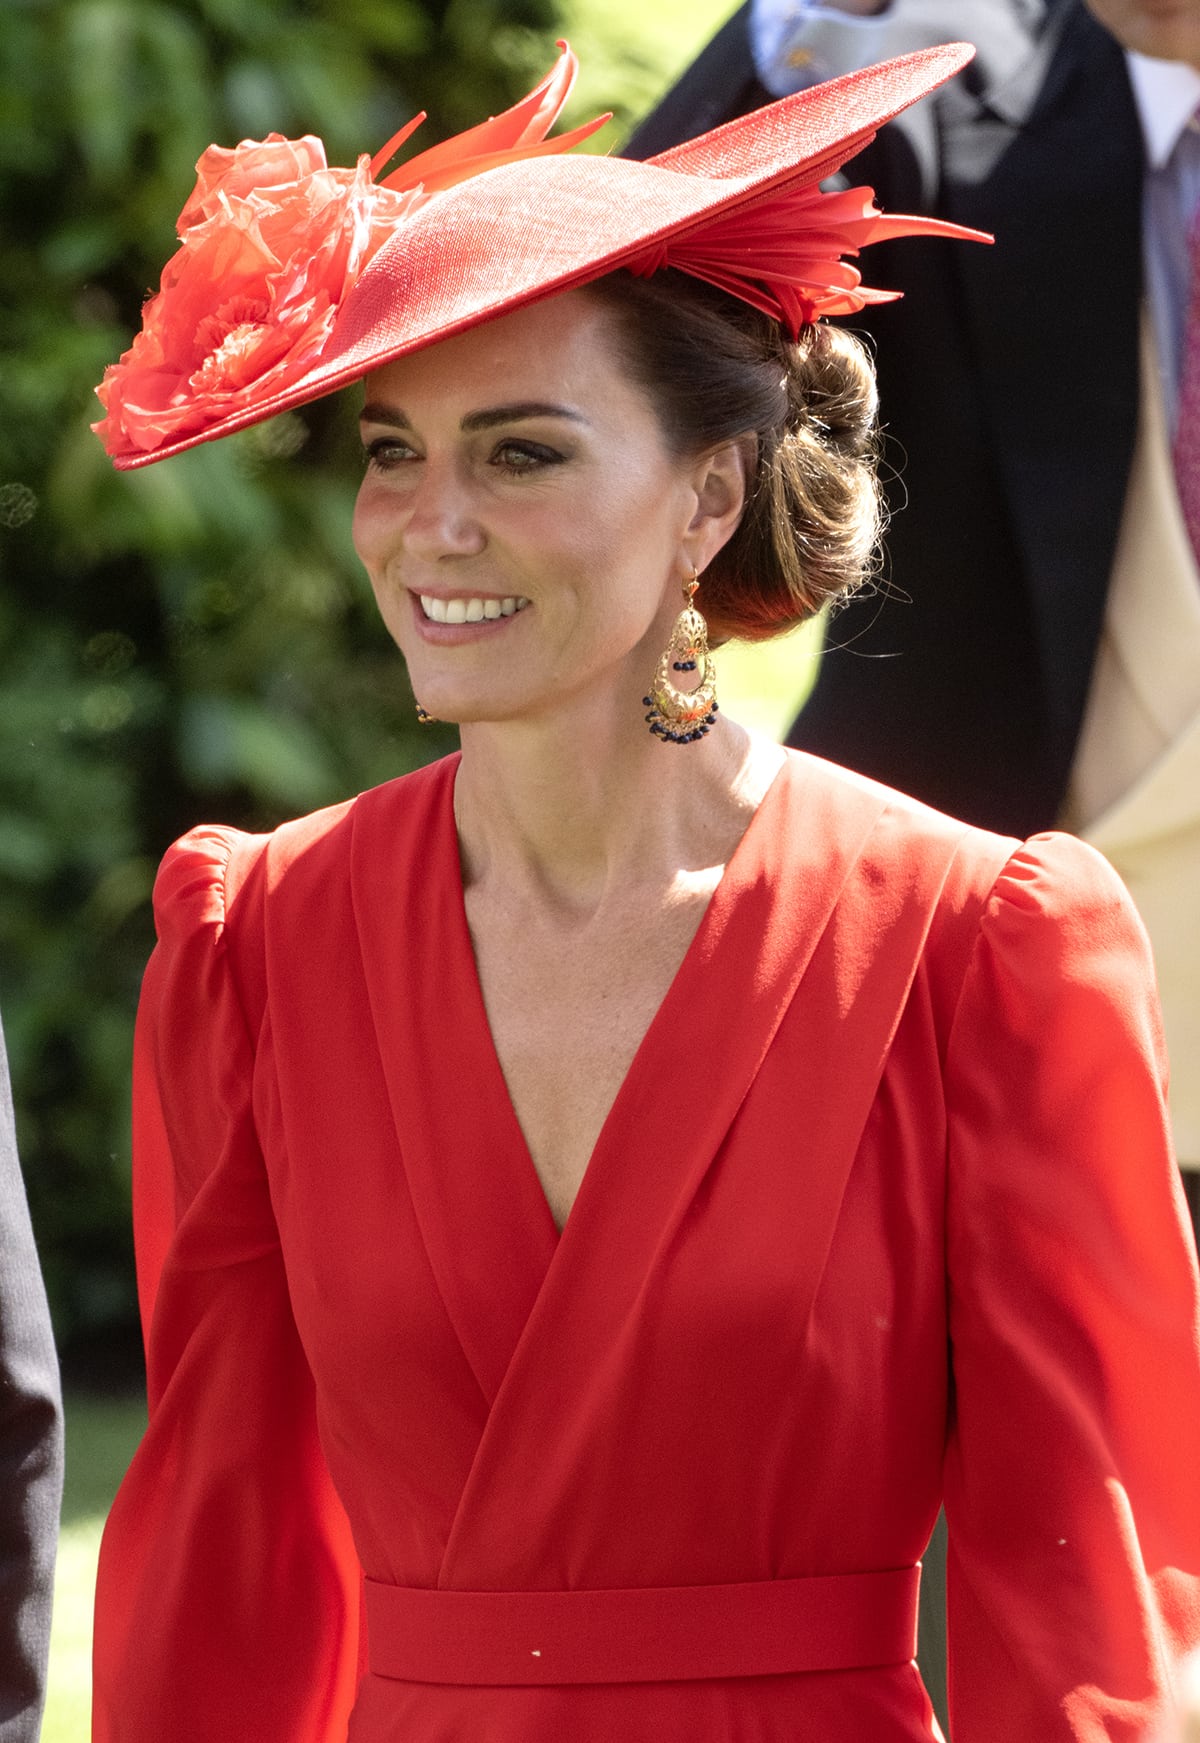 Kate Middleton completes her fiery red look with a custom-made red hat by Philip Treacy